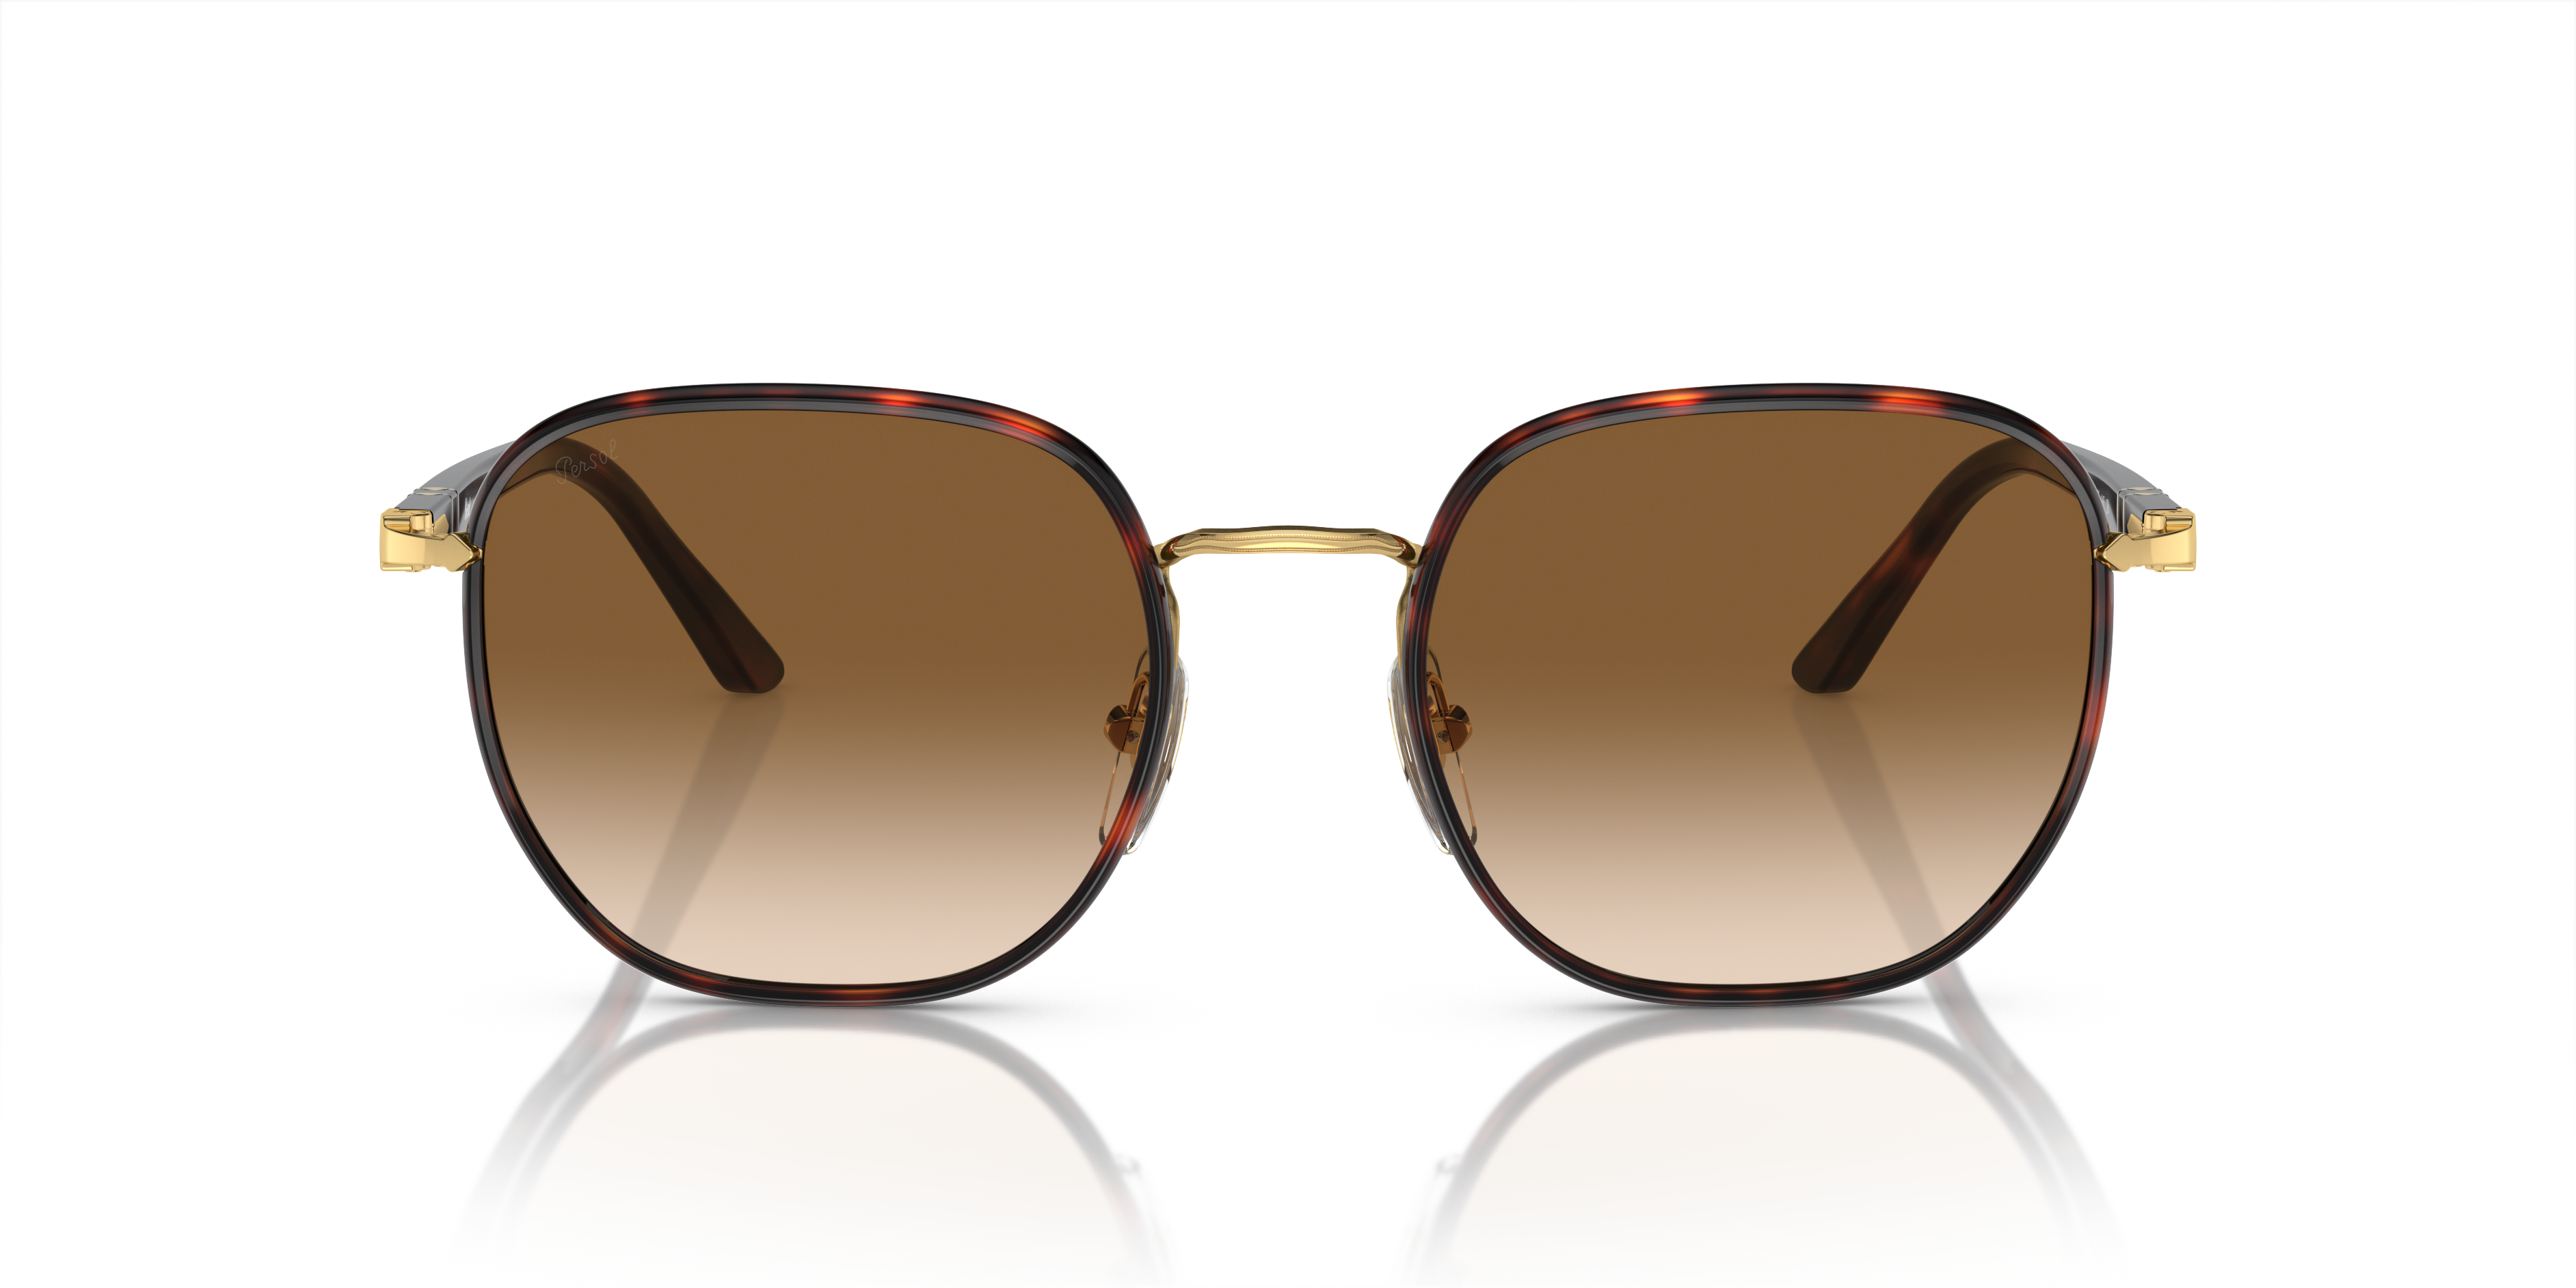 [products.image.front] Persol 0PO1015SJ 112651